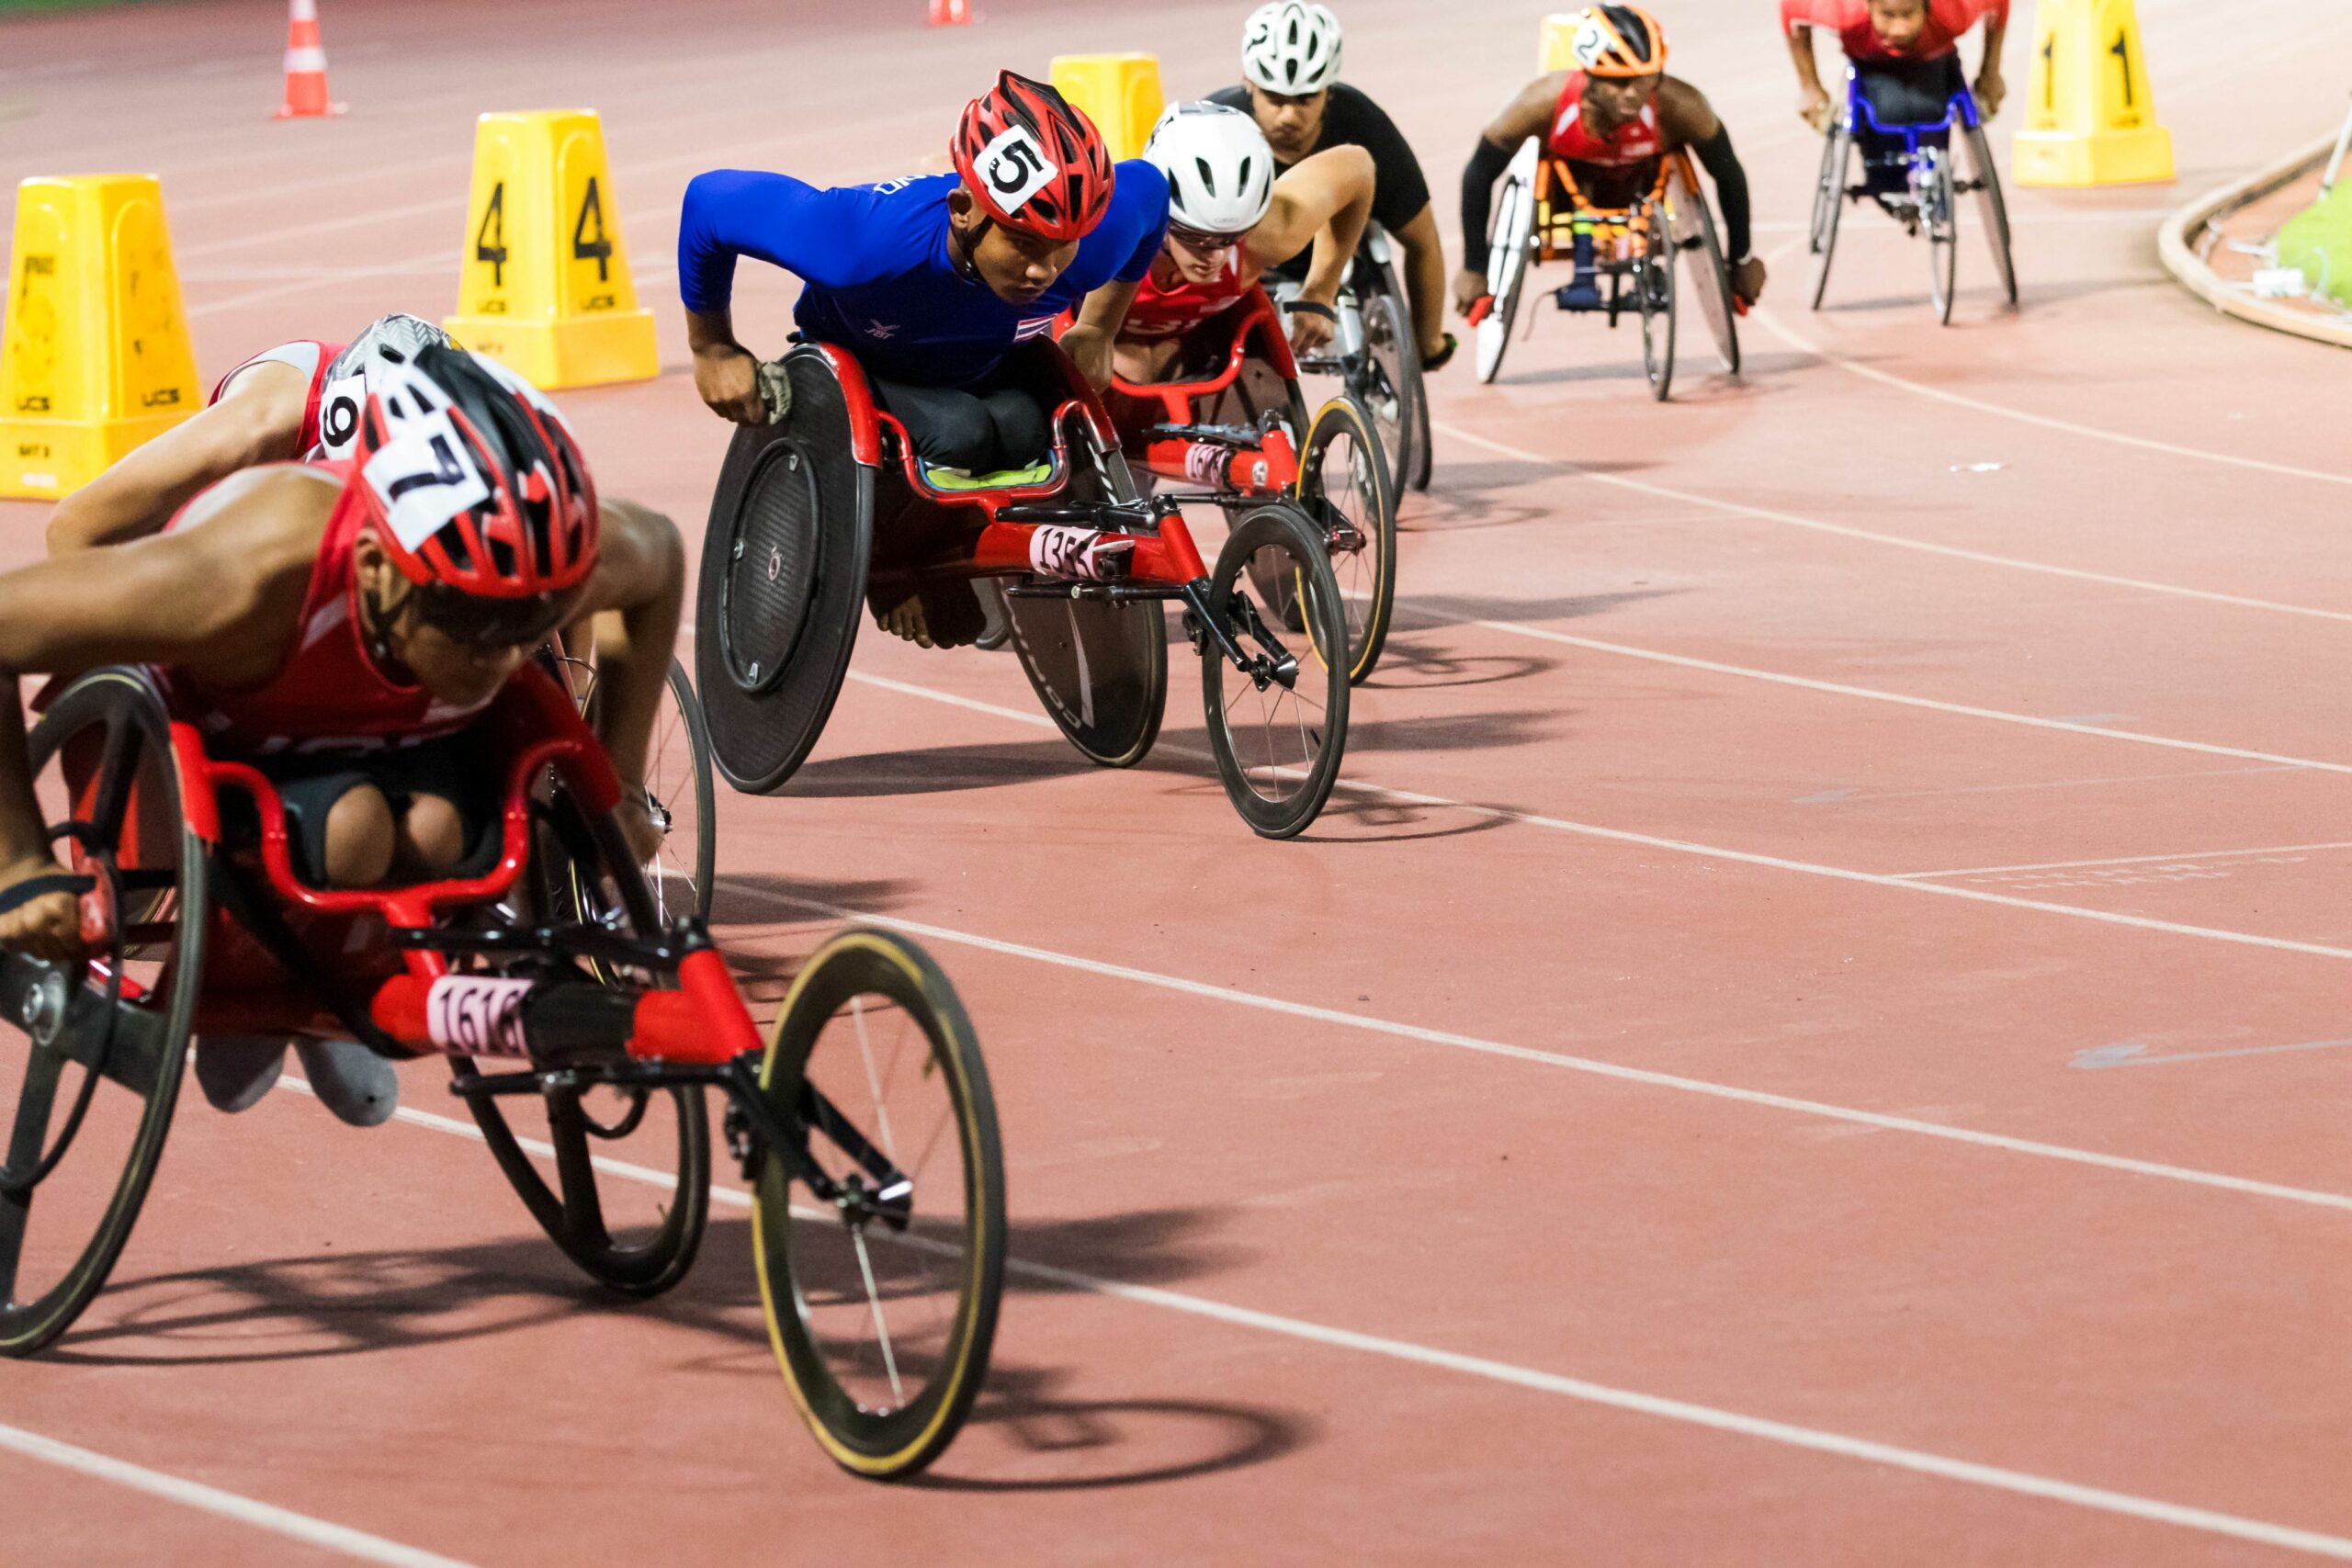 Wheelchair athletes lined up on a track getting ready to race